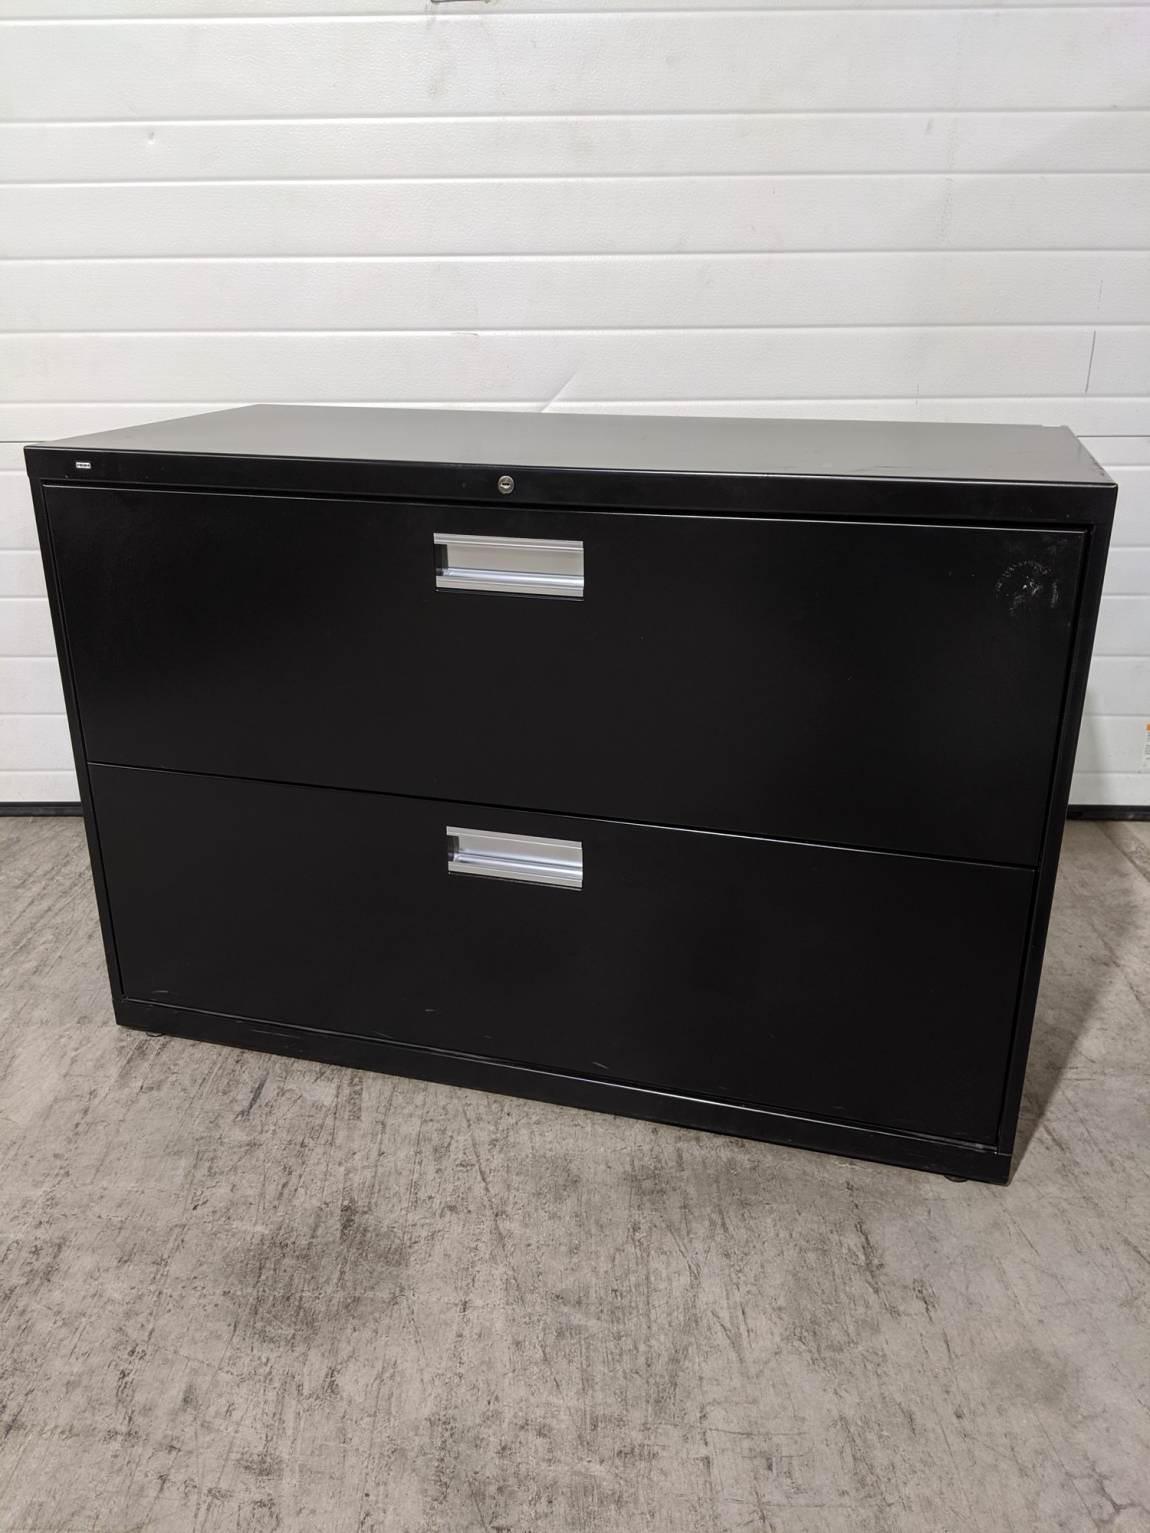 Black Hon 2 Drawer Lateral Filing Cabinet – 41.75 Inch Wide